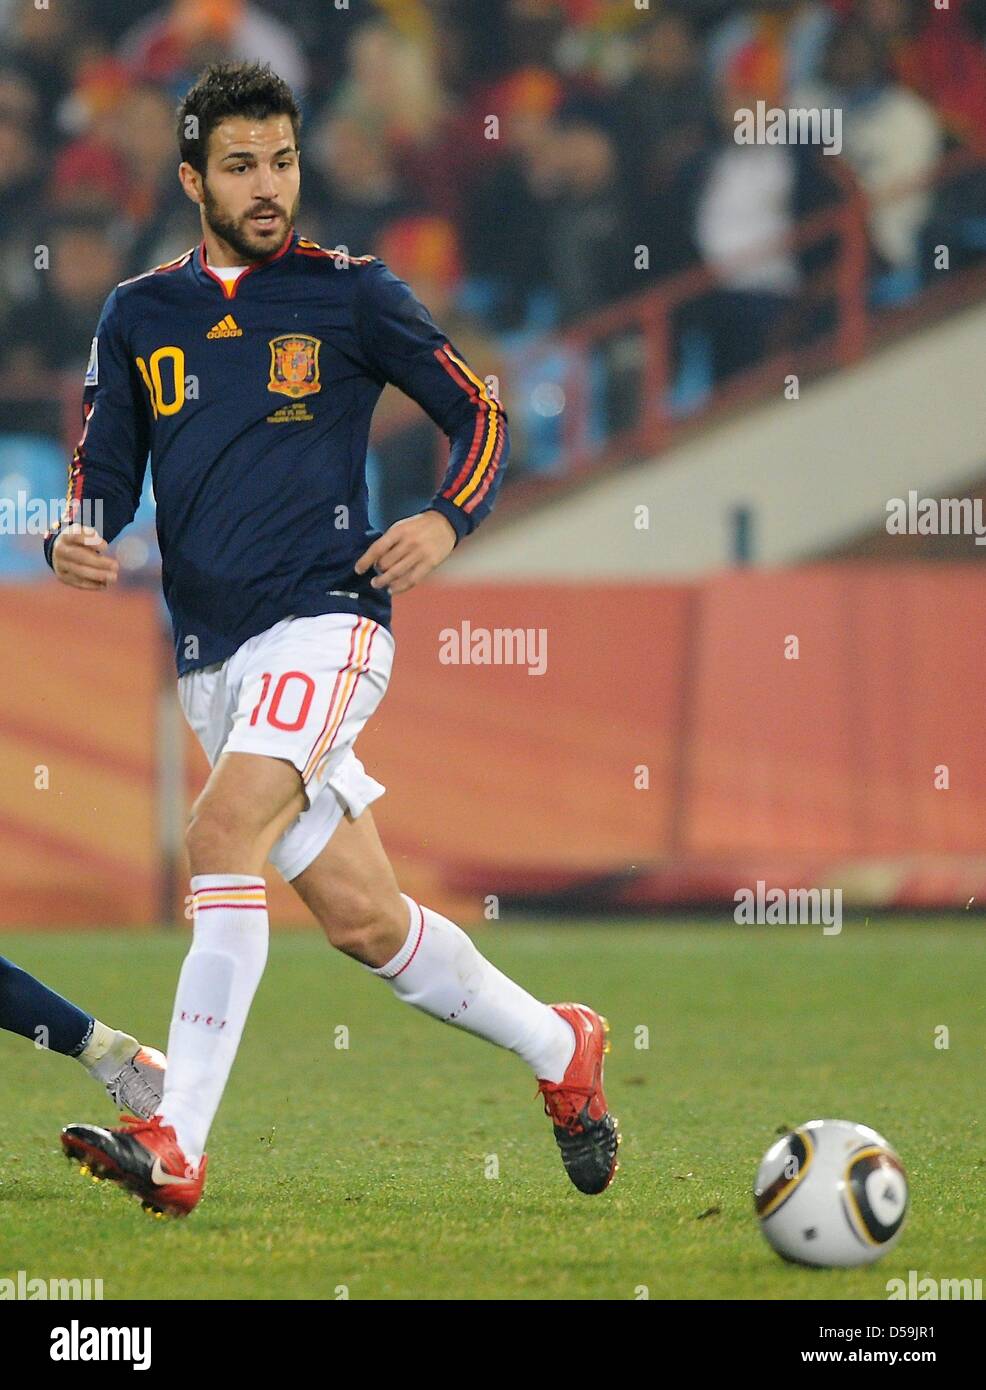 Spain's Cesc Fabregas during the 2010 FIFA World Cup group H match between Chile and Spain at Loftus Versfeld Stadium in Pretoria, South Africa 25 June 2010. Photo: Marcus Brandt dpa - Please refer to http://dpaq.de/FIFA-WM2010-TC Stock Photo